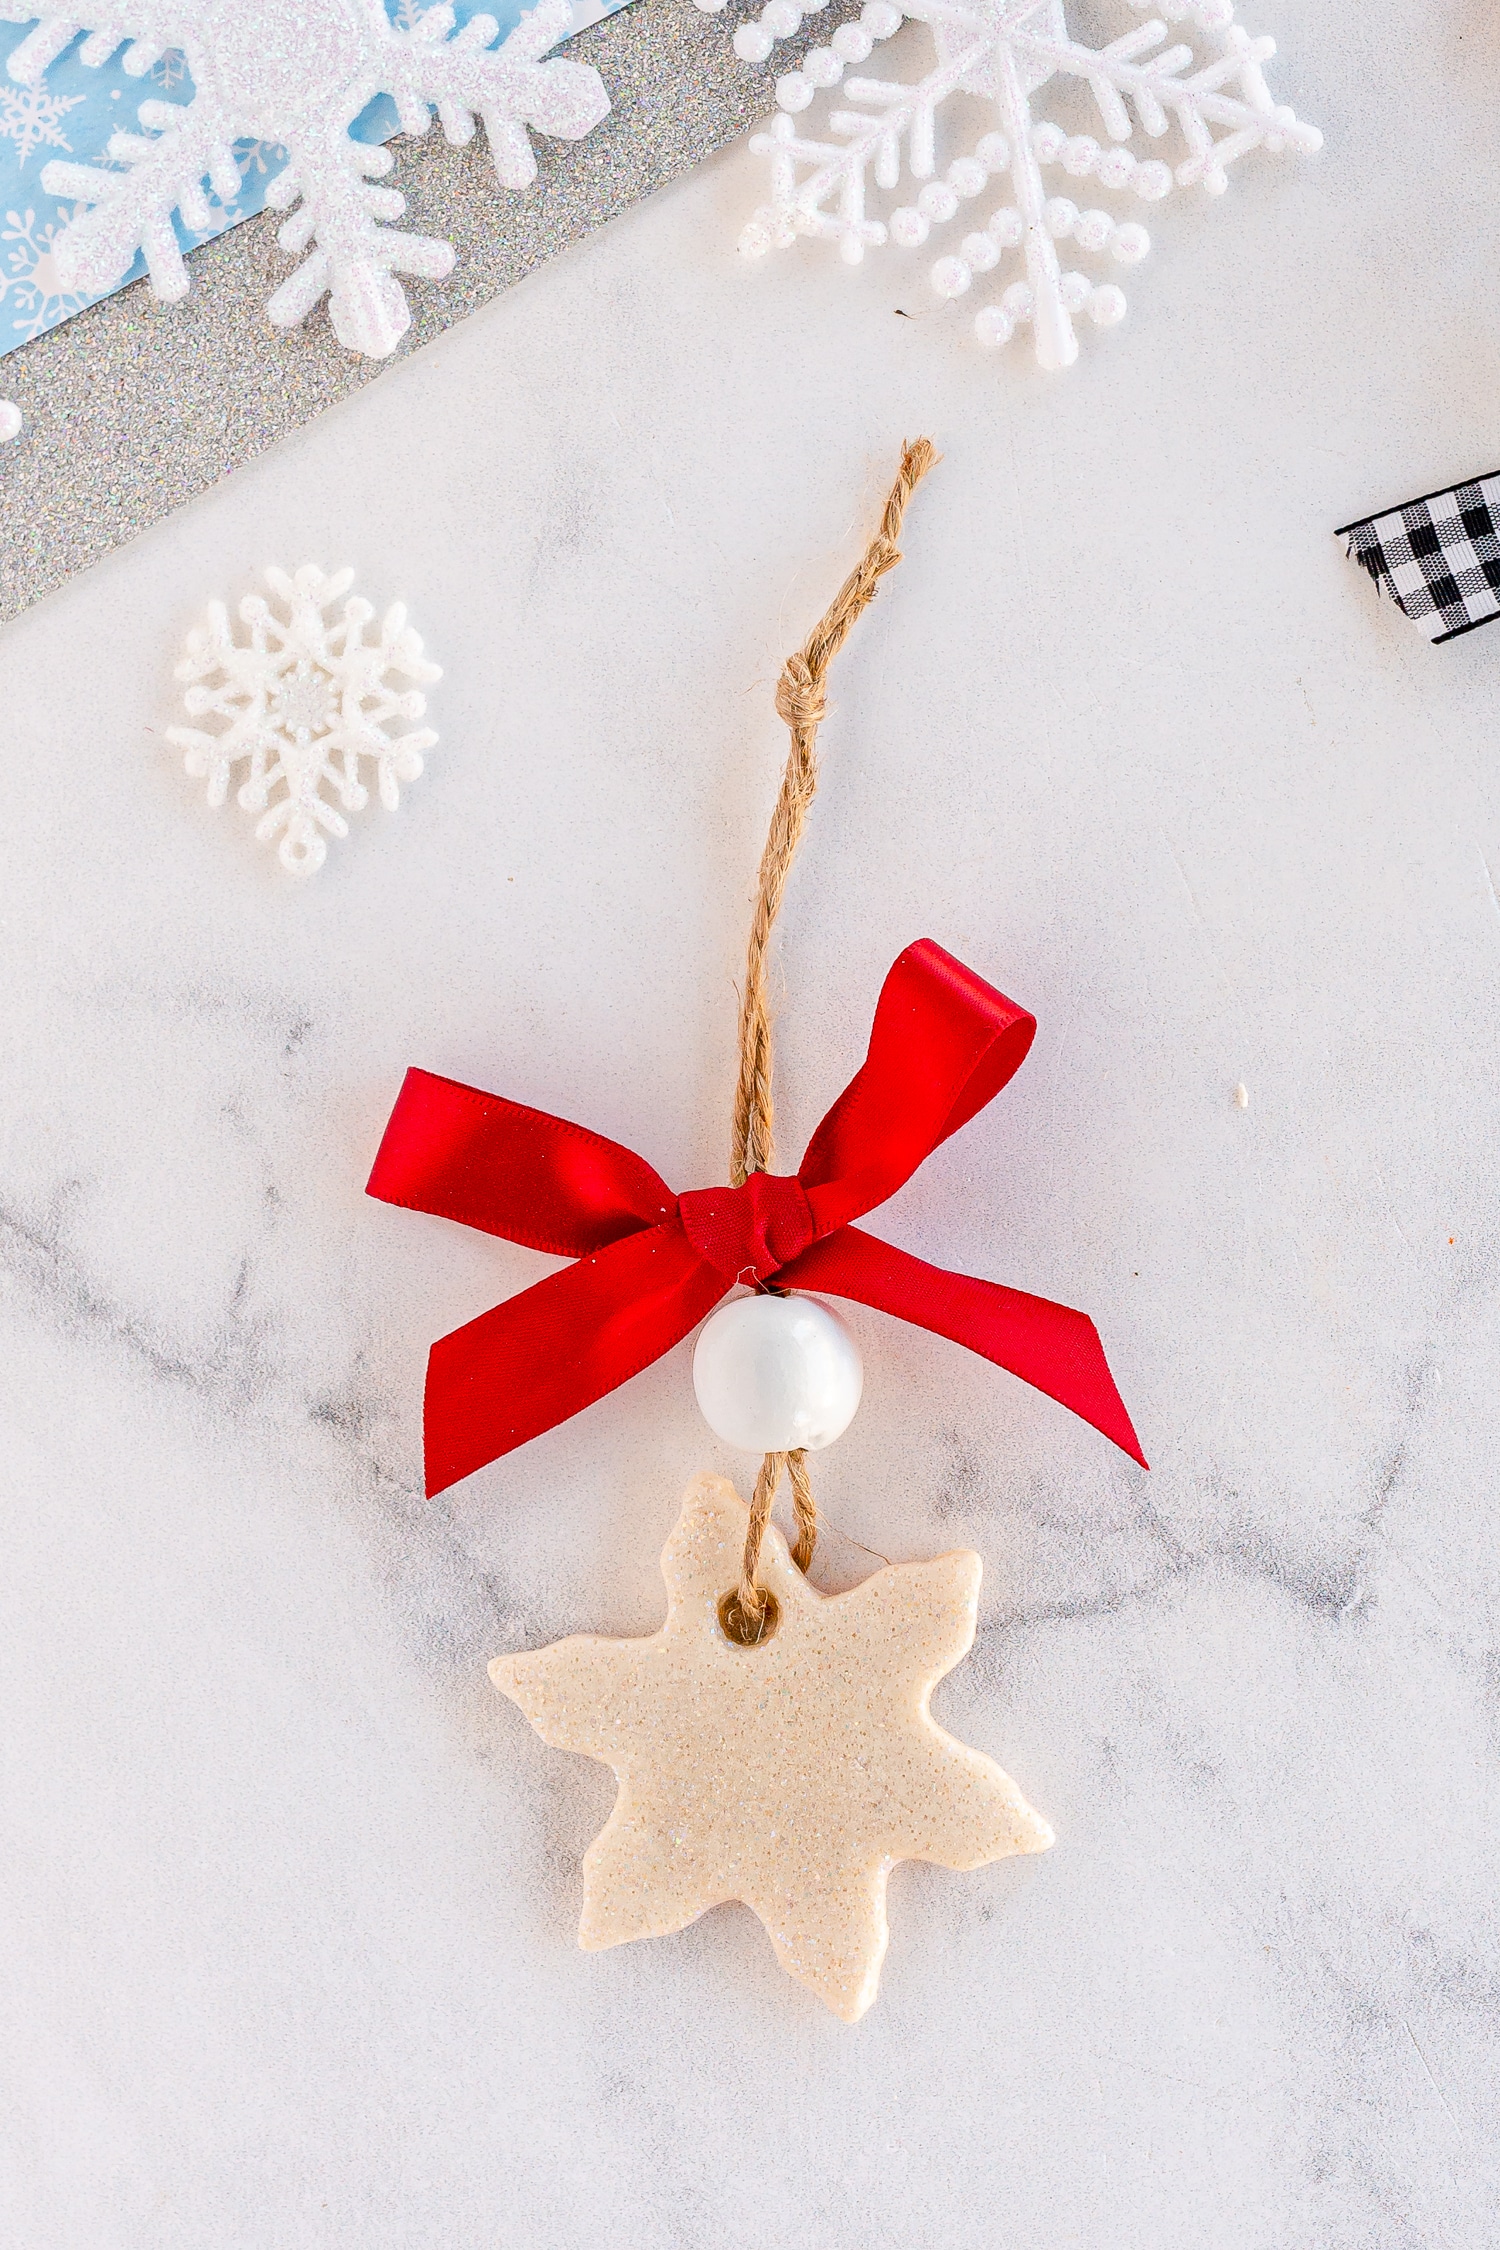 salt dough ornament with red ribbon